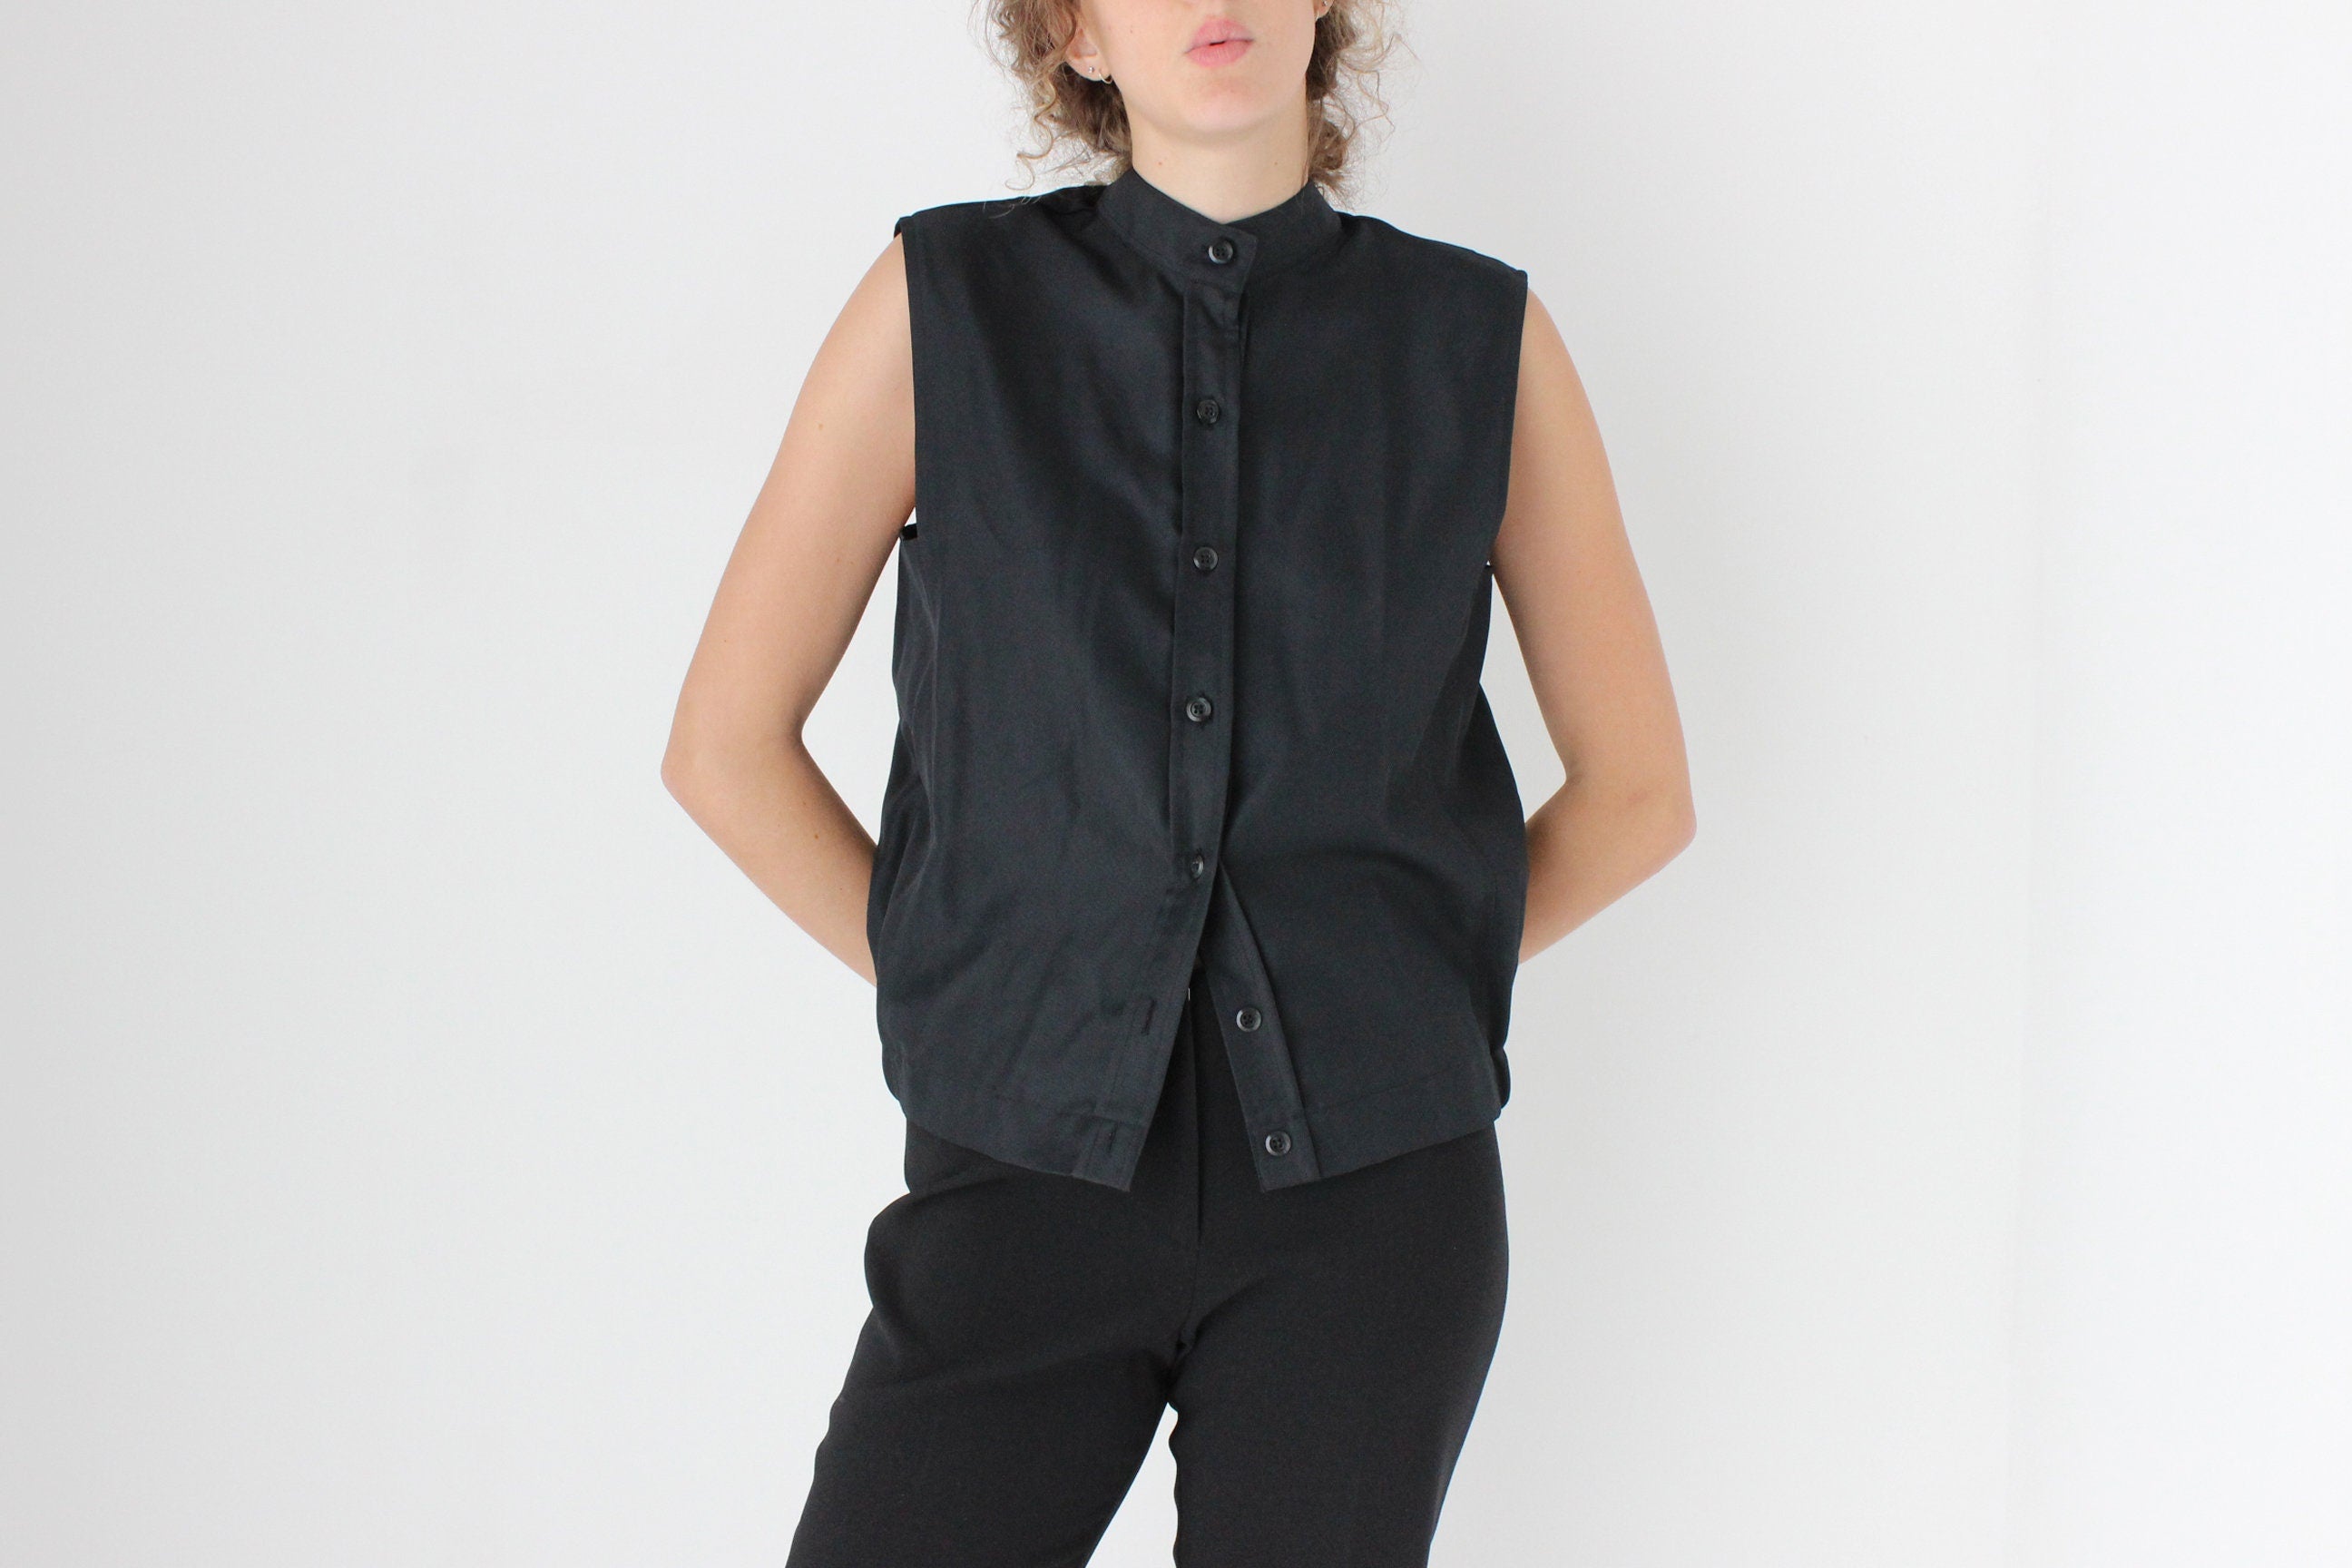 90s Unusual Business/Casual Button Front Waistcoat Top